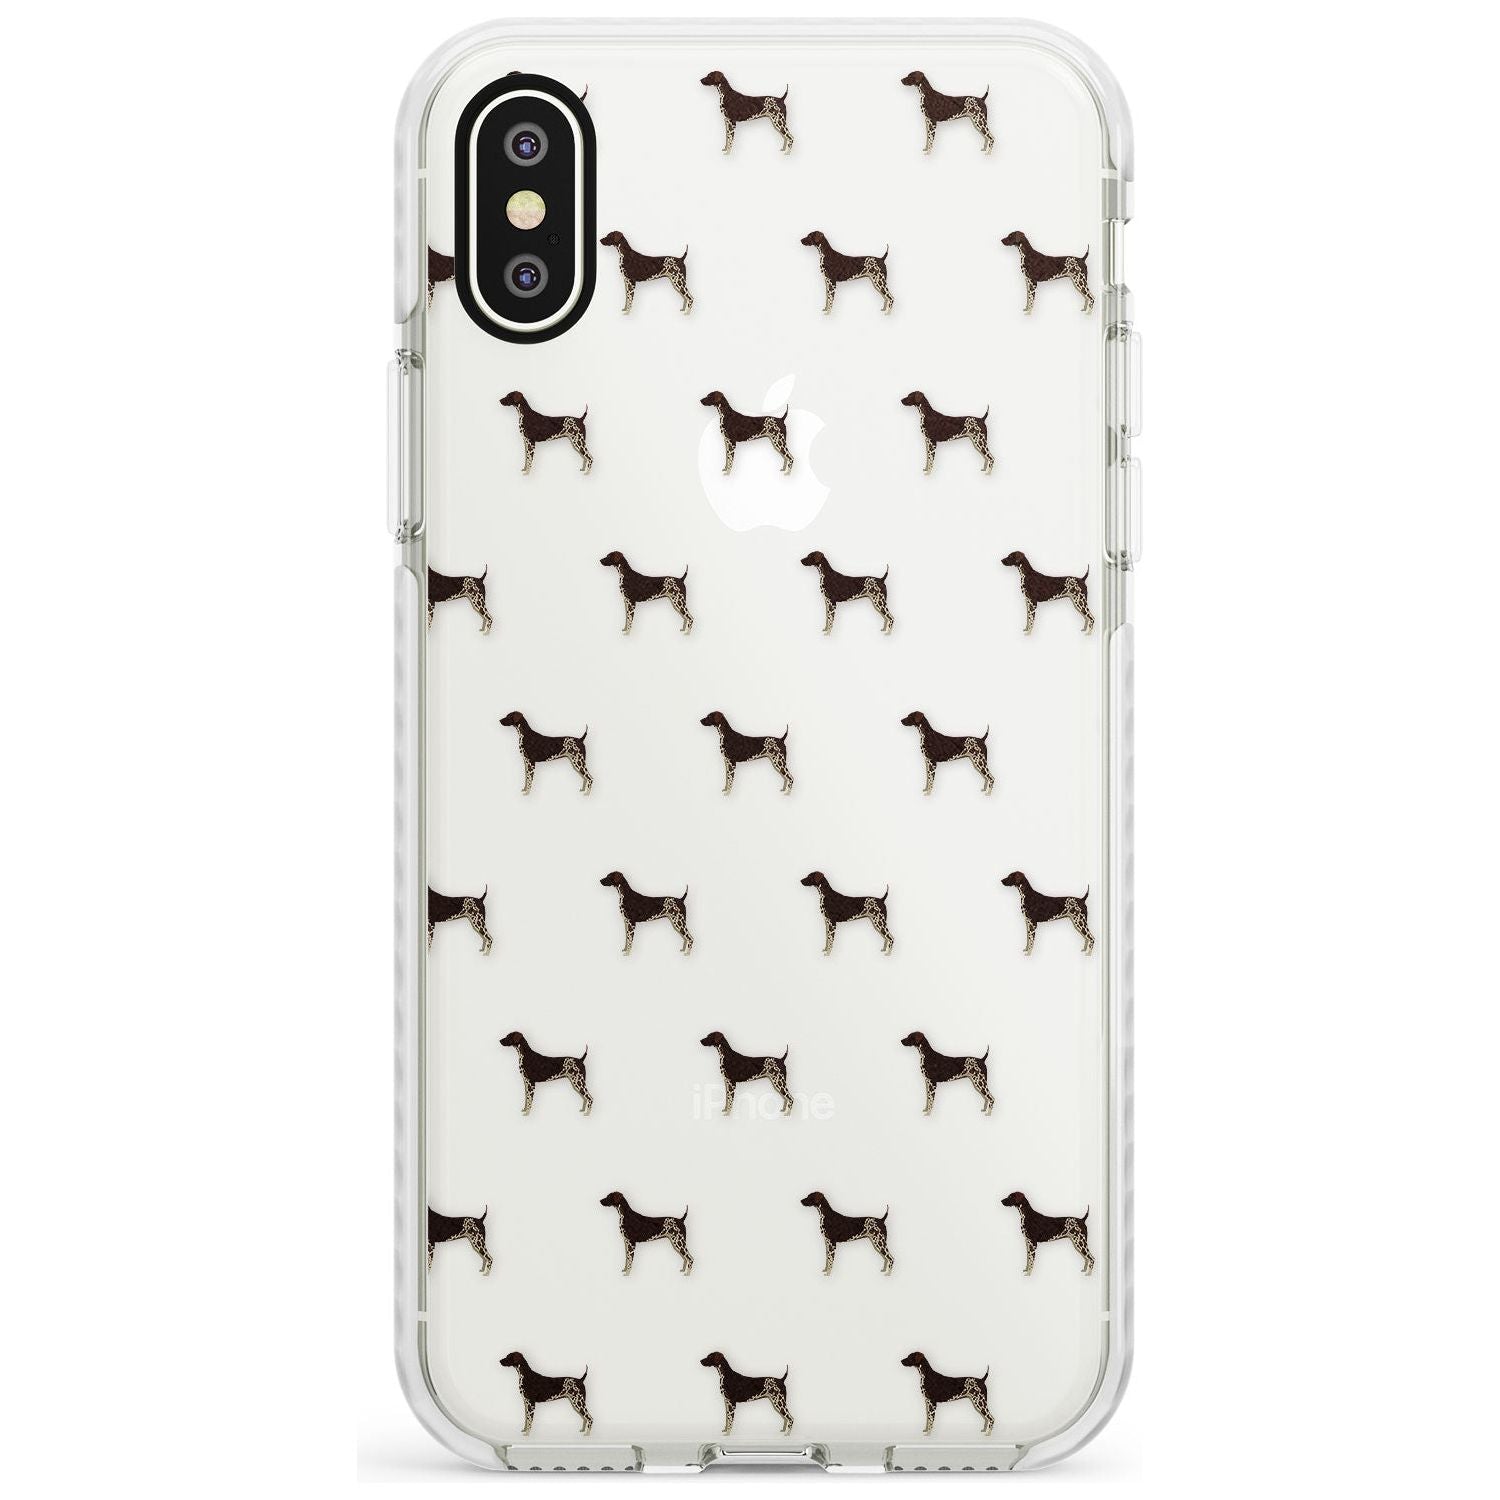 German Shorthaired Pointer Dog Pattern Clear Impact Phone Case for iPhone X XS Max XR